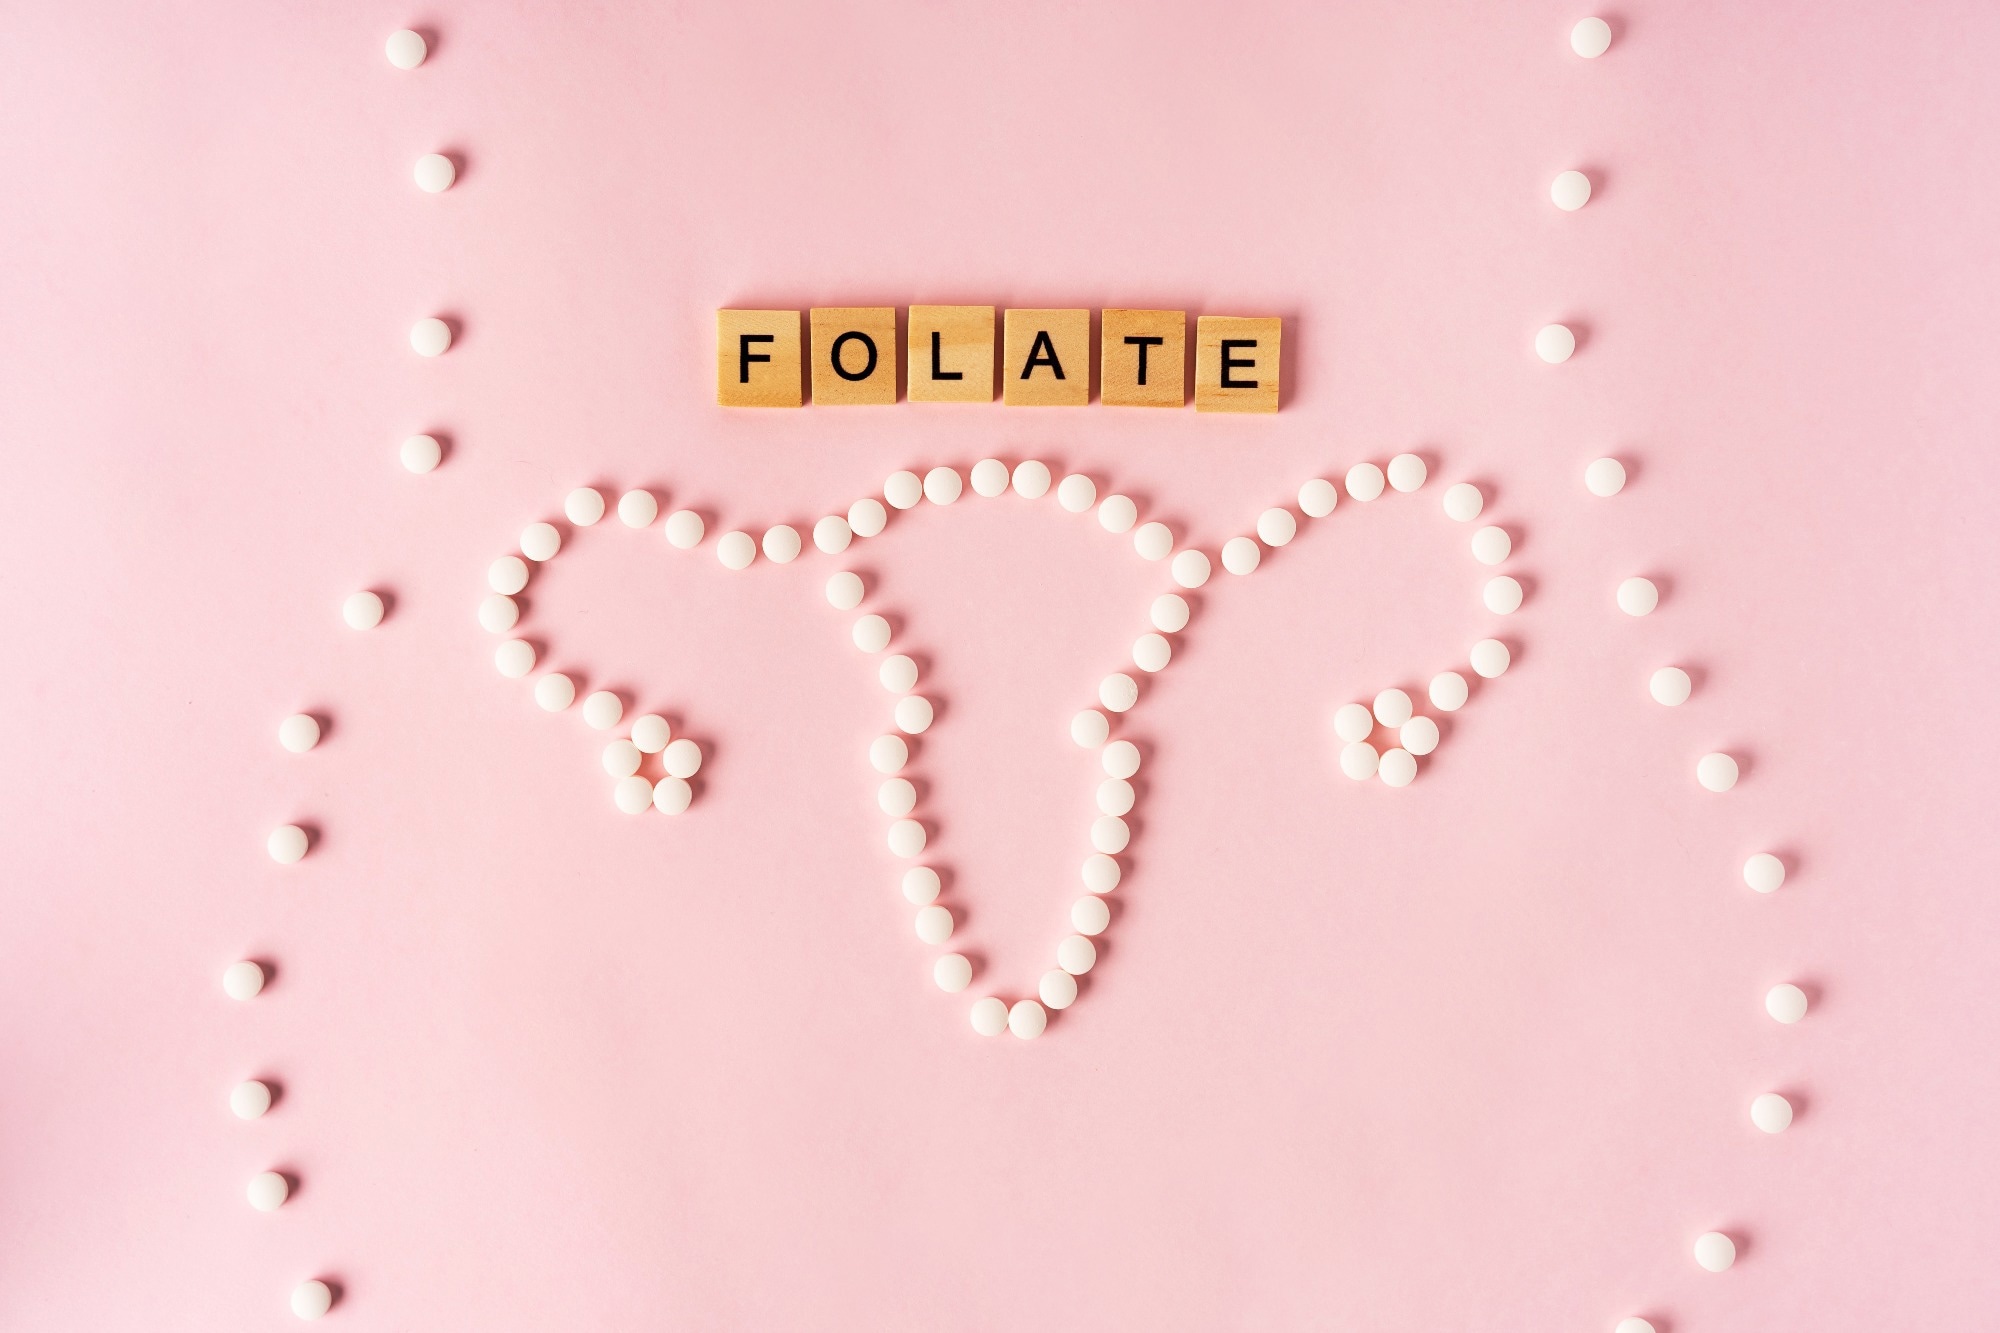 Study: National Diet and Nutrition Survey data reveal a decline in folate status in the UK population between 2008 and 2019. Image Credit: Ivanova Ksenia / Shutterstock